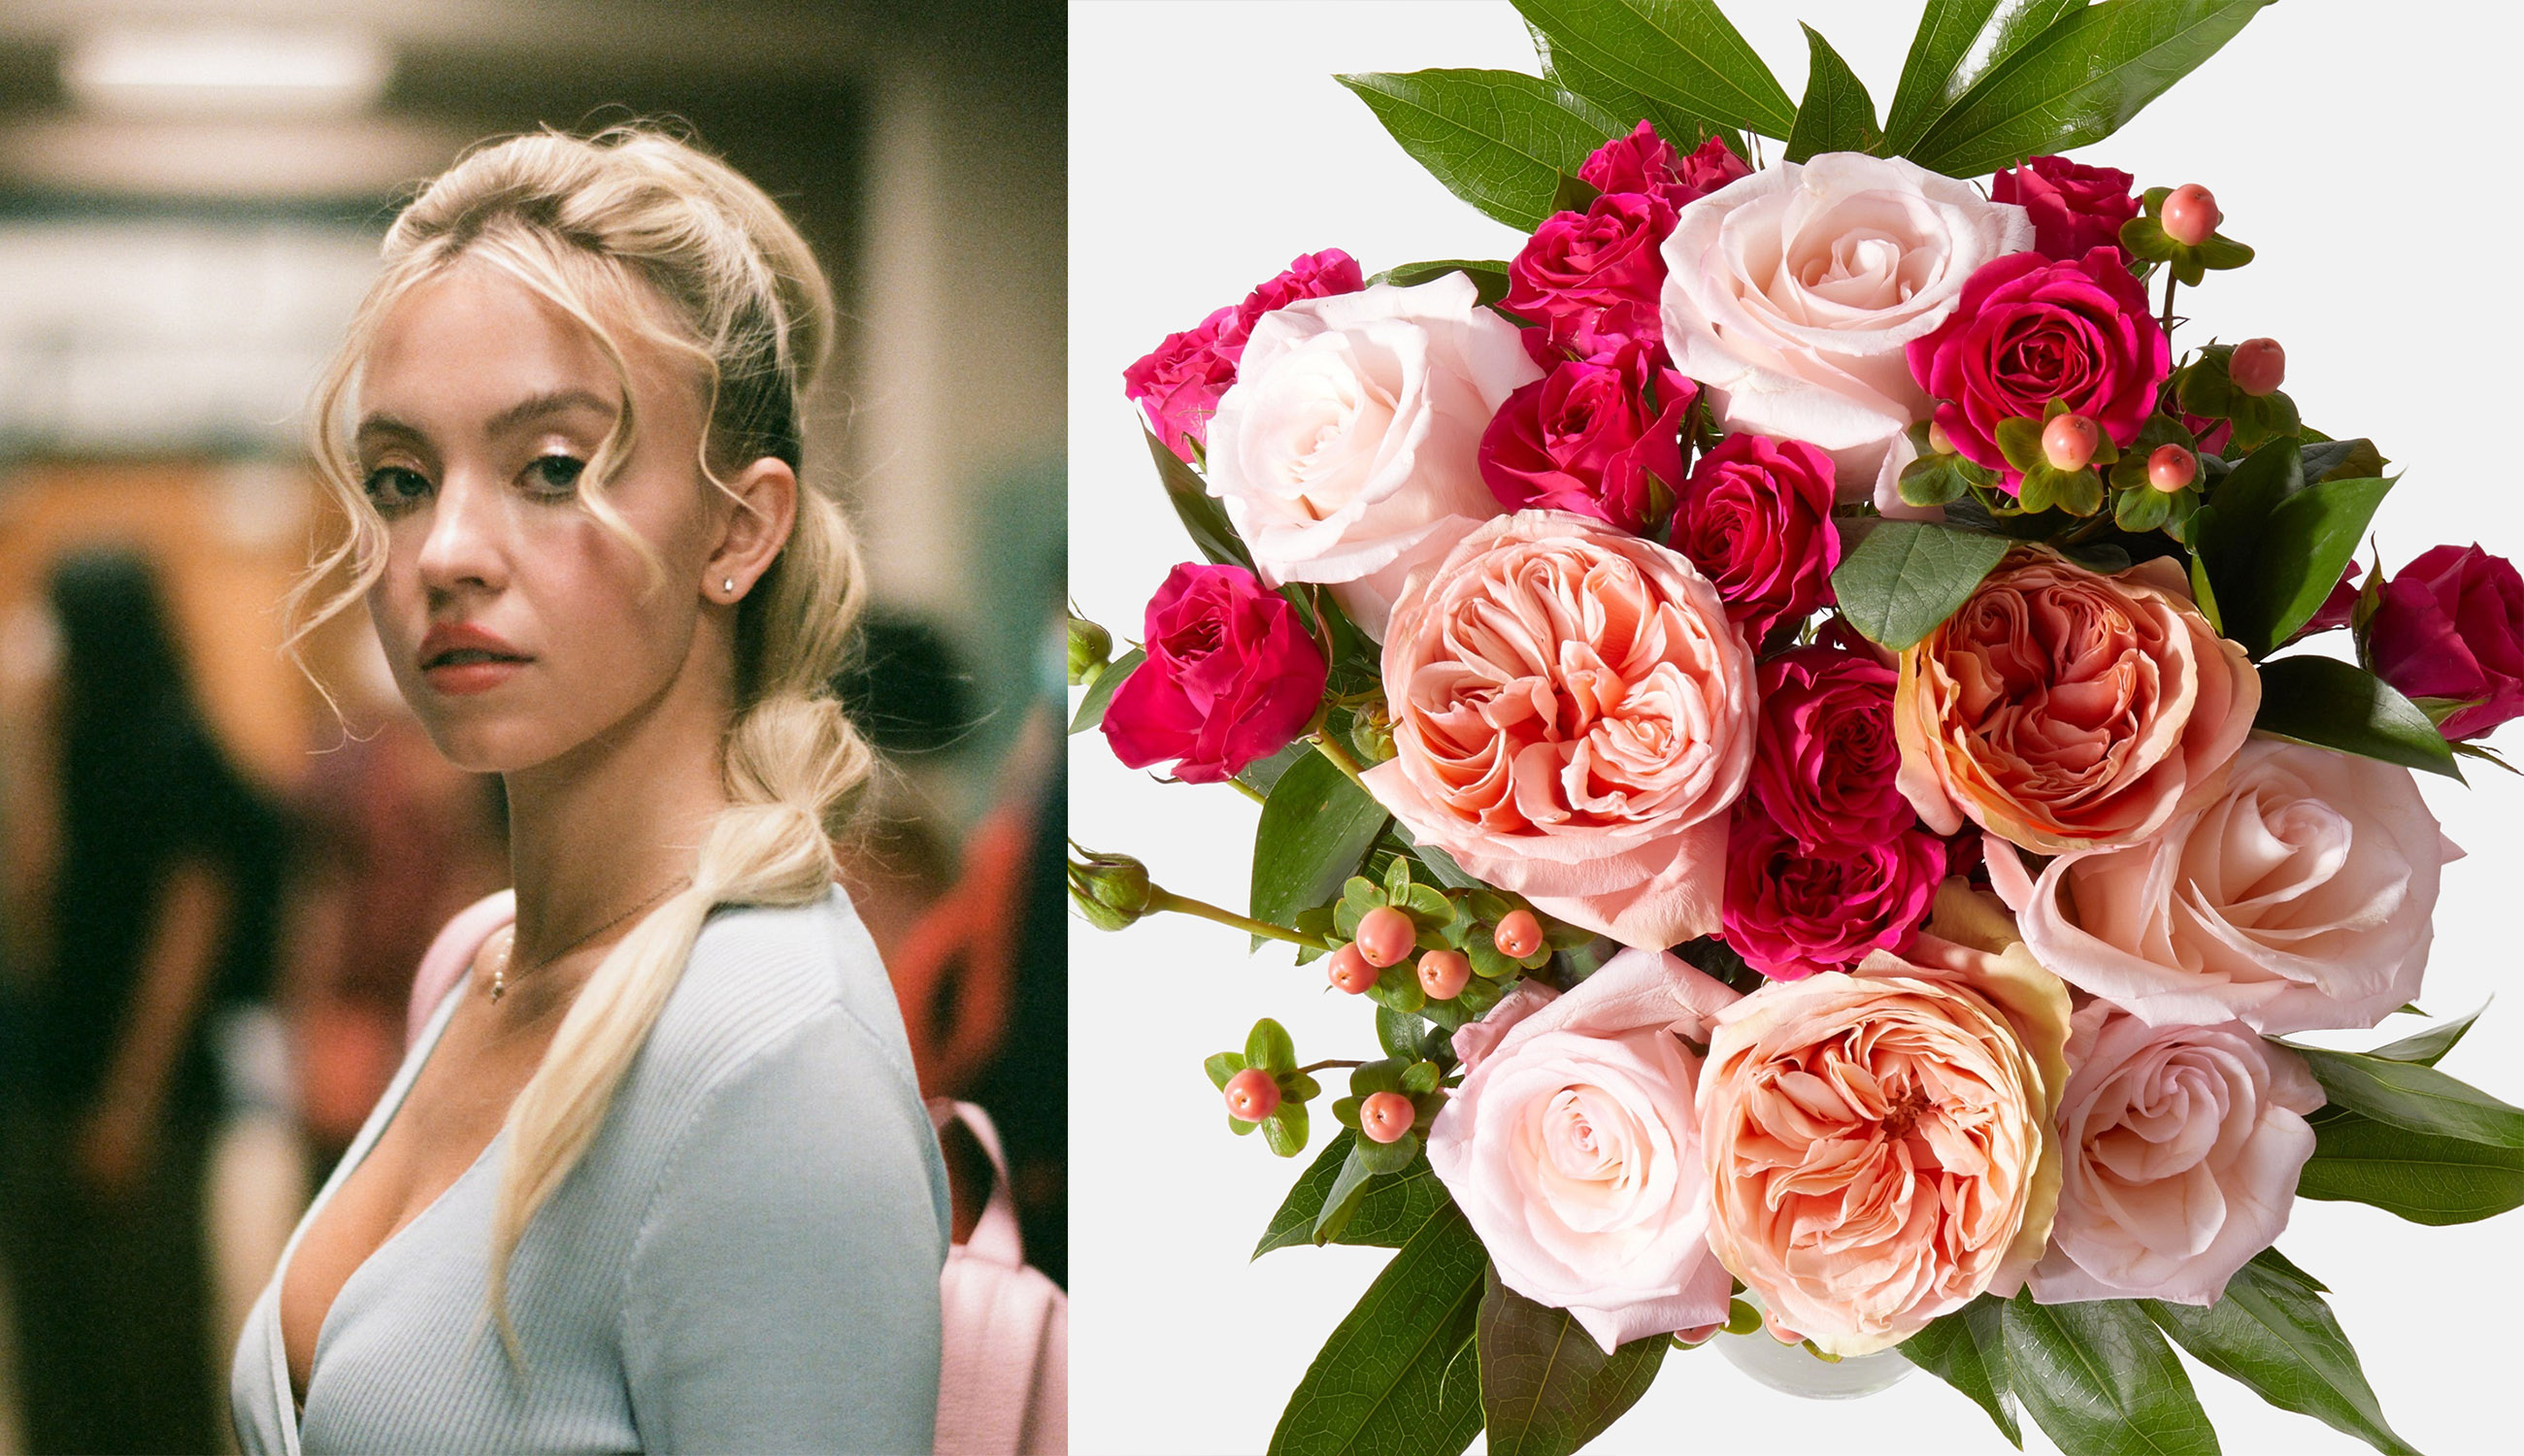 Cassie from Euphoria side by side with a pink flower bouquet